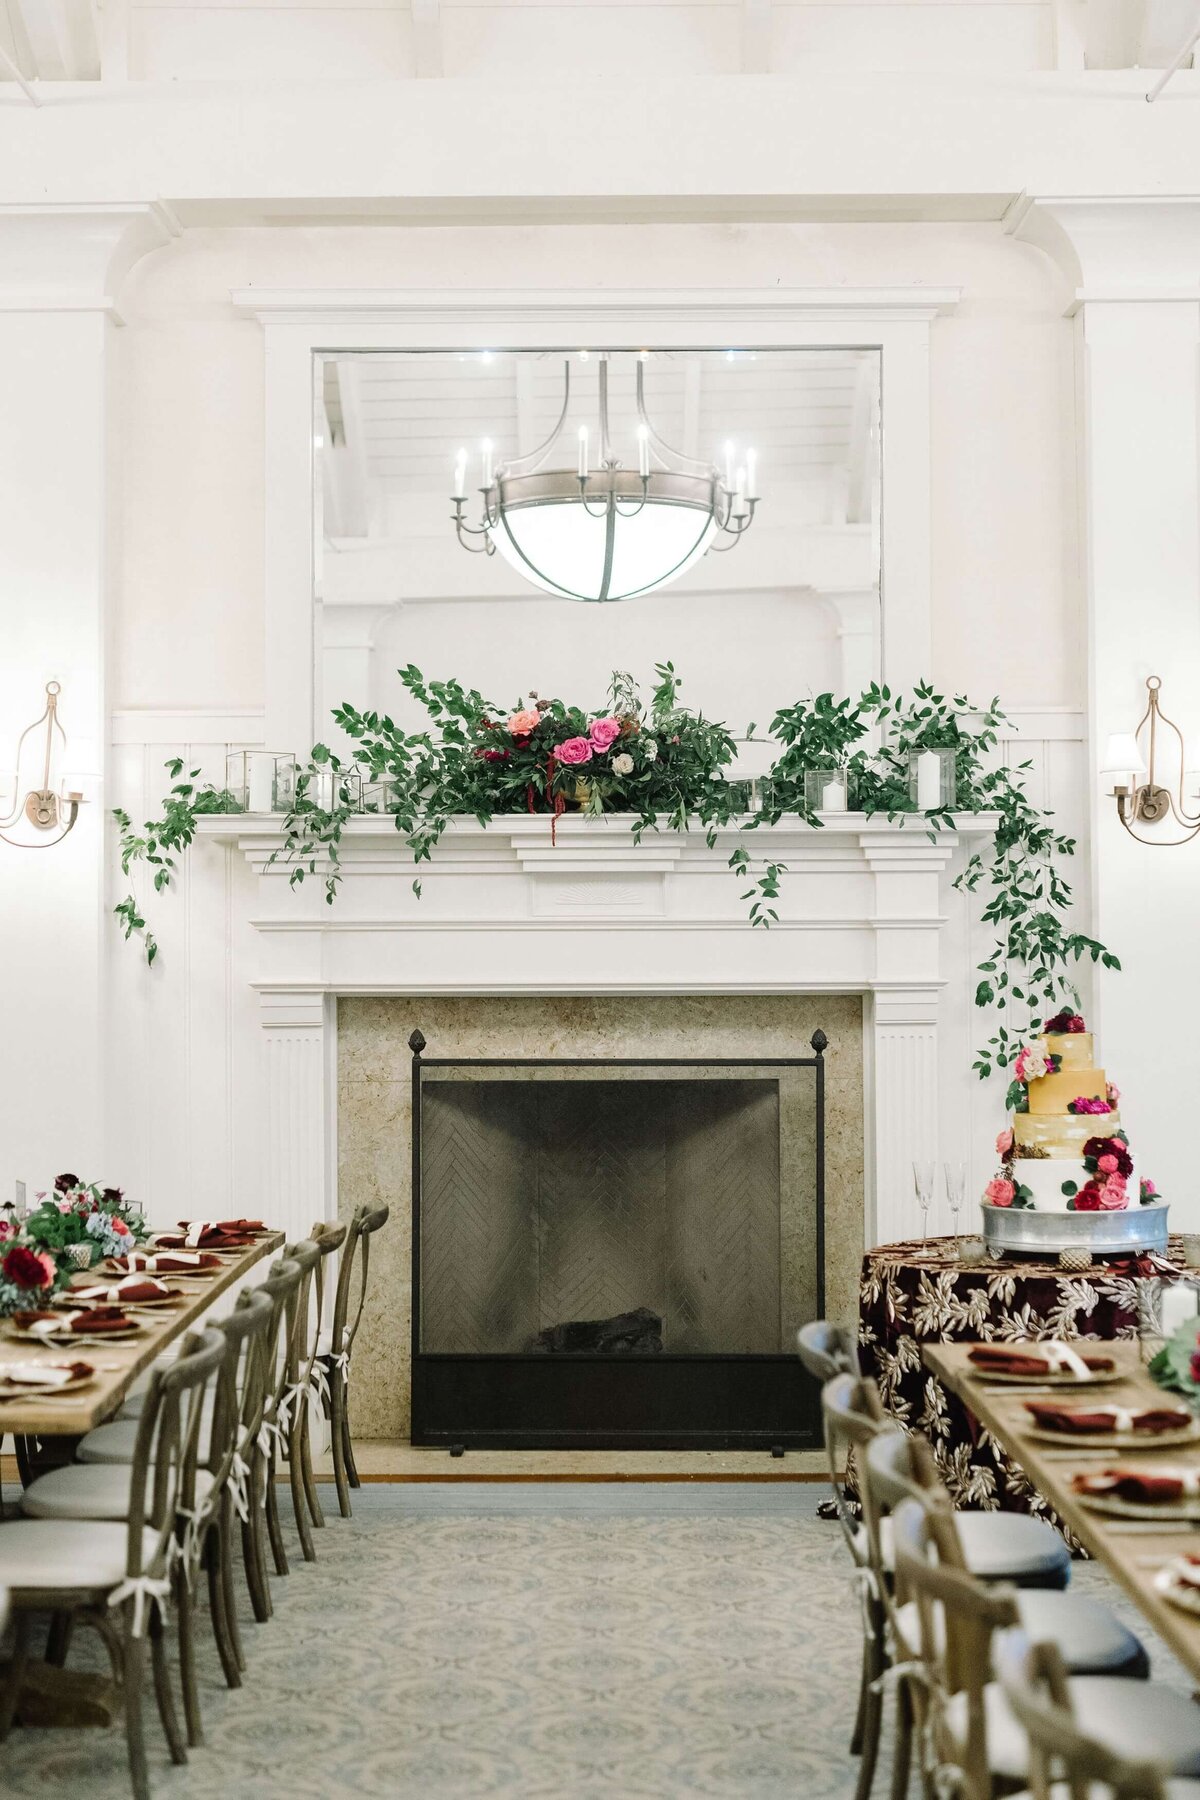 floral decor on a fireplace